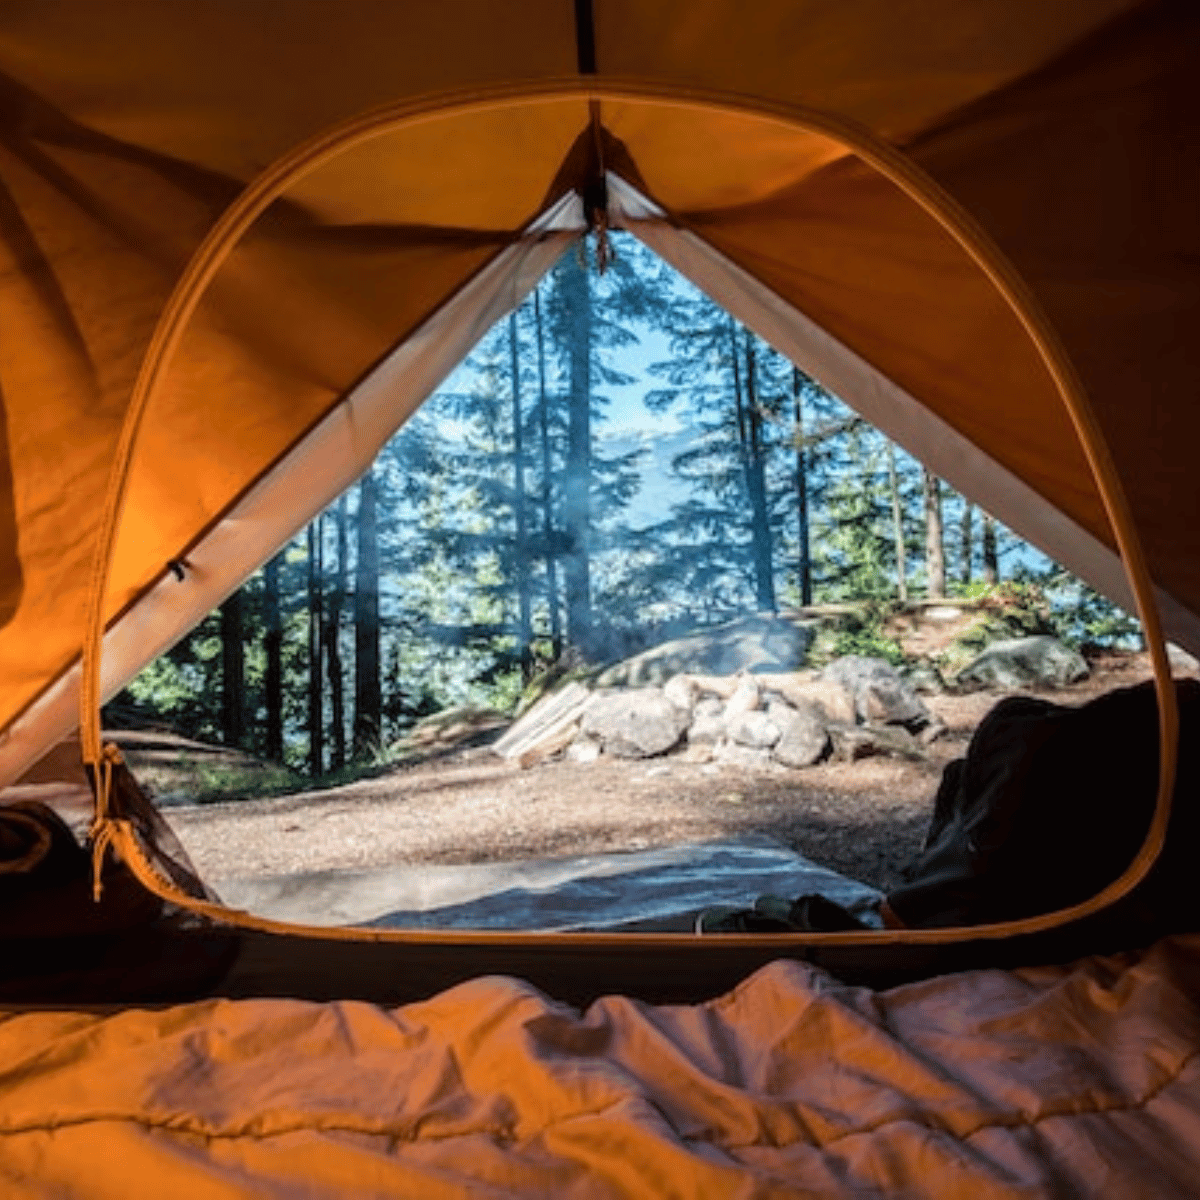 Camping vs. Glamping: Which is Better for You and the Environment?